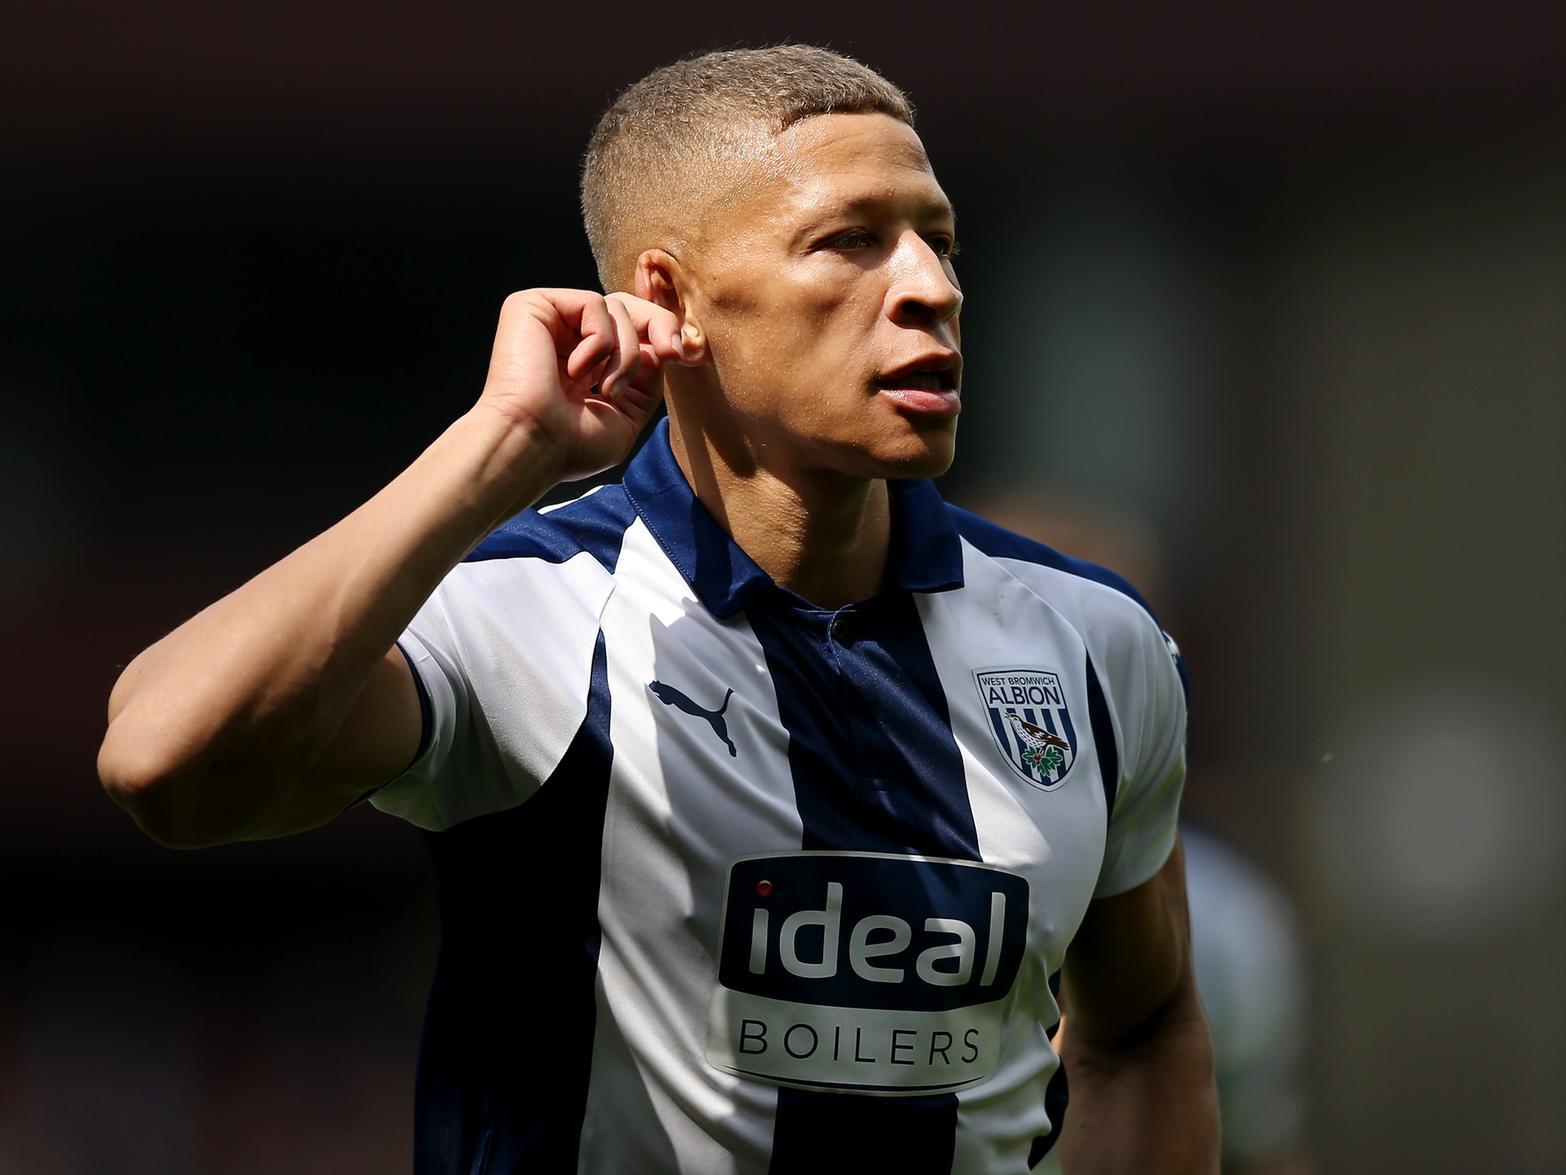 West Brom will look to seal their promotion hopes in January with a 10m bid for Newcastle United striker Dwight Gayle, who scored 24 goals for the Baggies on loan last season. (Birmingham Mail)